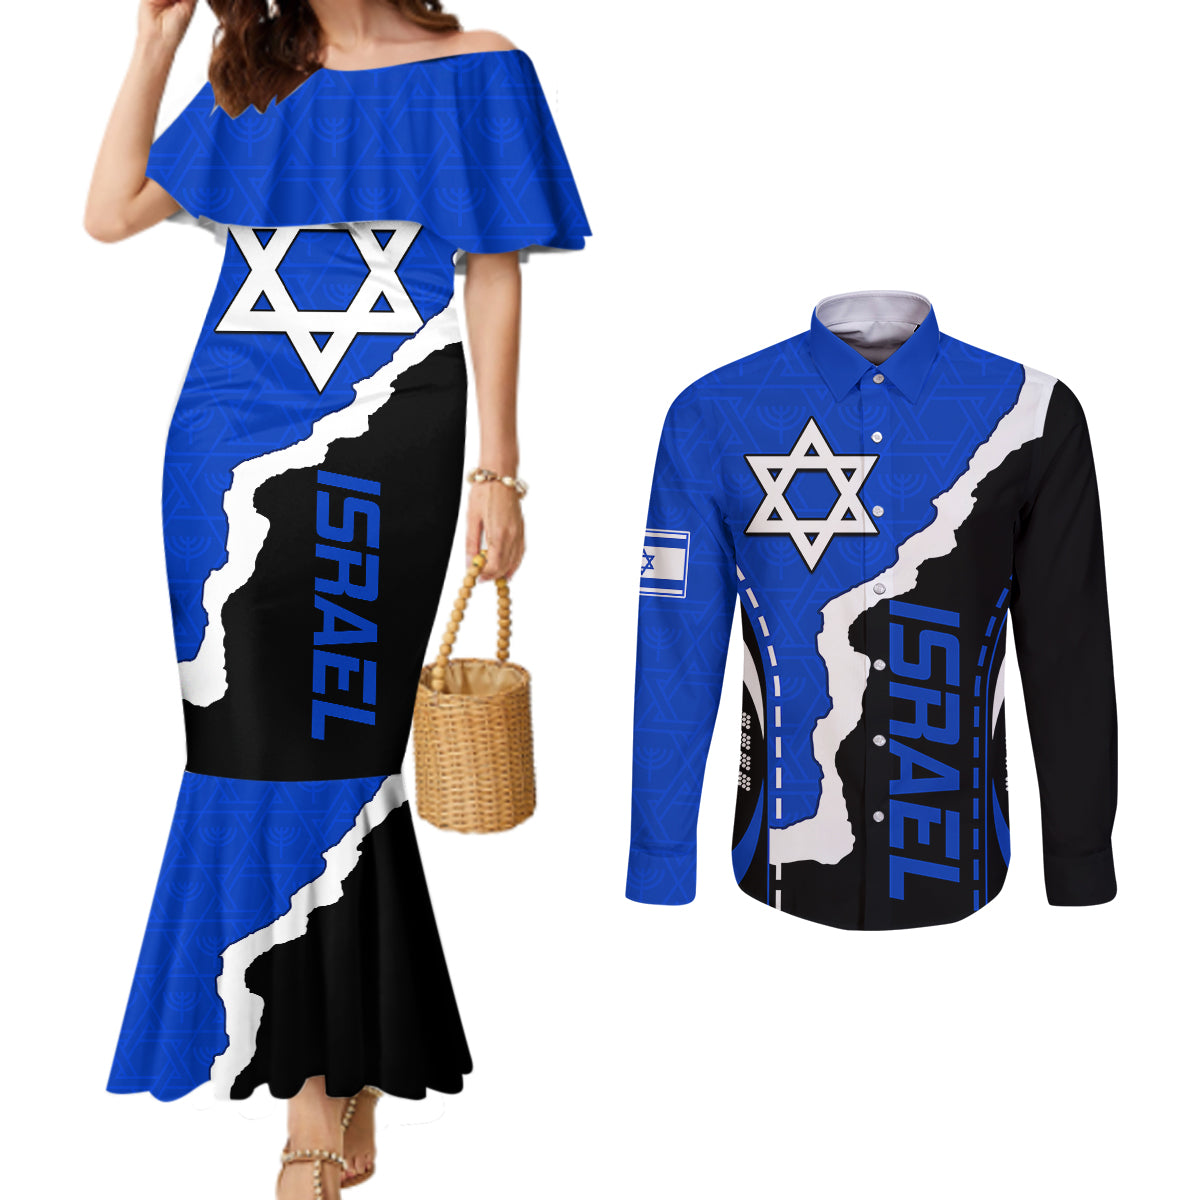 israel-couples-matching-mermaid-dress-and-long-sleeve-button-shirts-stars-of-david-sporty-style